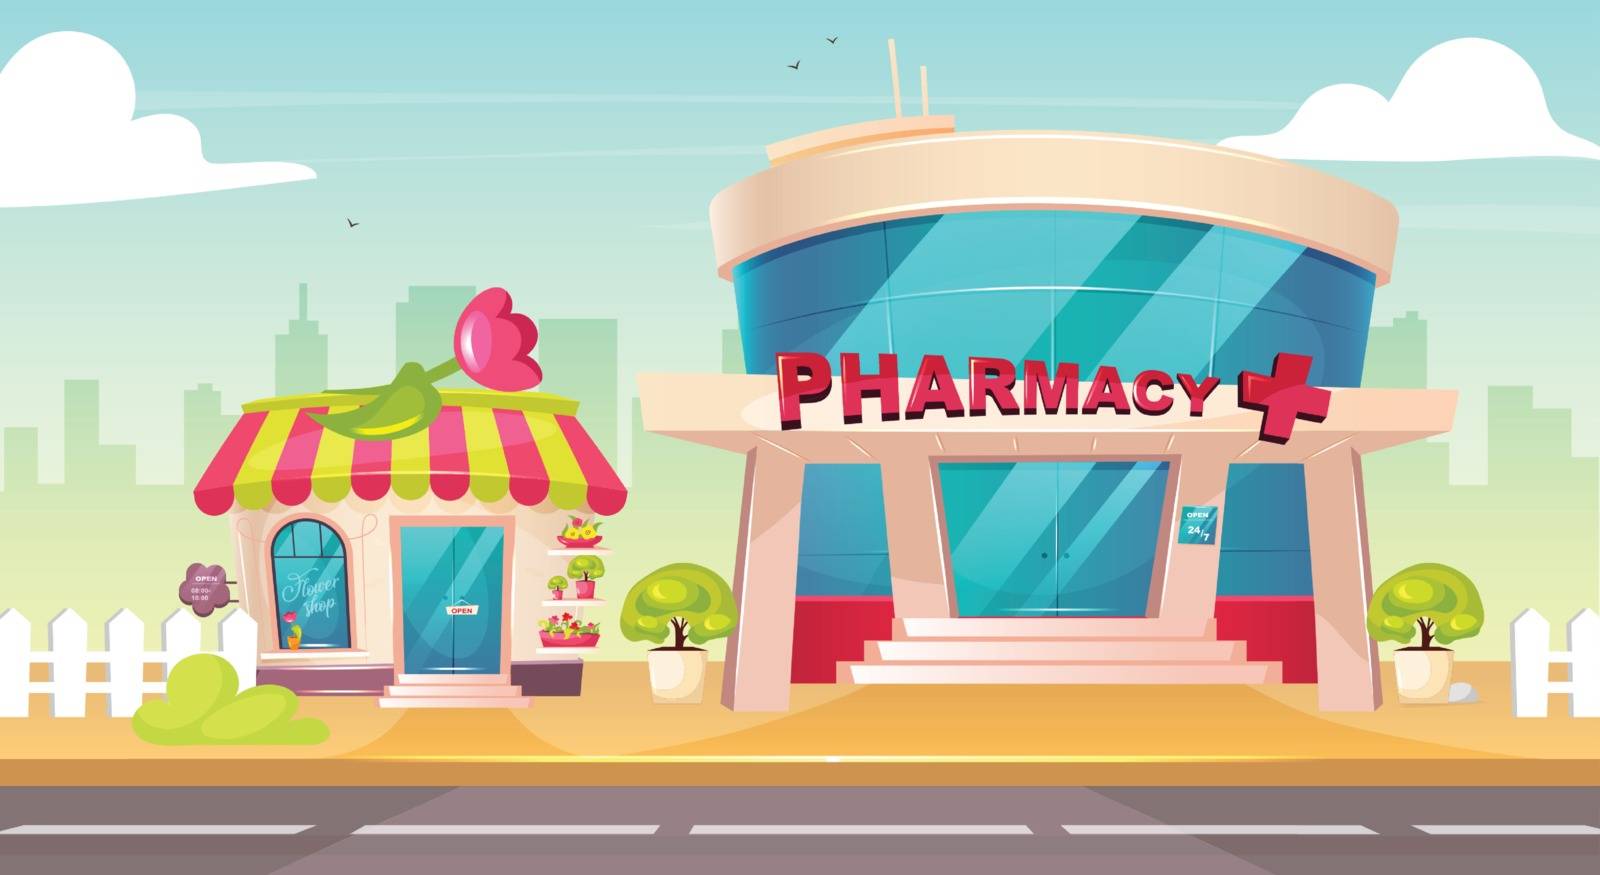 City center flat color vector illustration. Flower shop front. Pharmacy glass building exterior. Drugstore entrance with nobody outside. Cute 2D cartoon cityscape with sidewalk on background by ntl